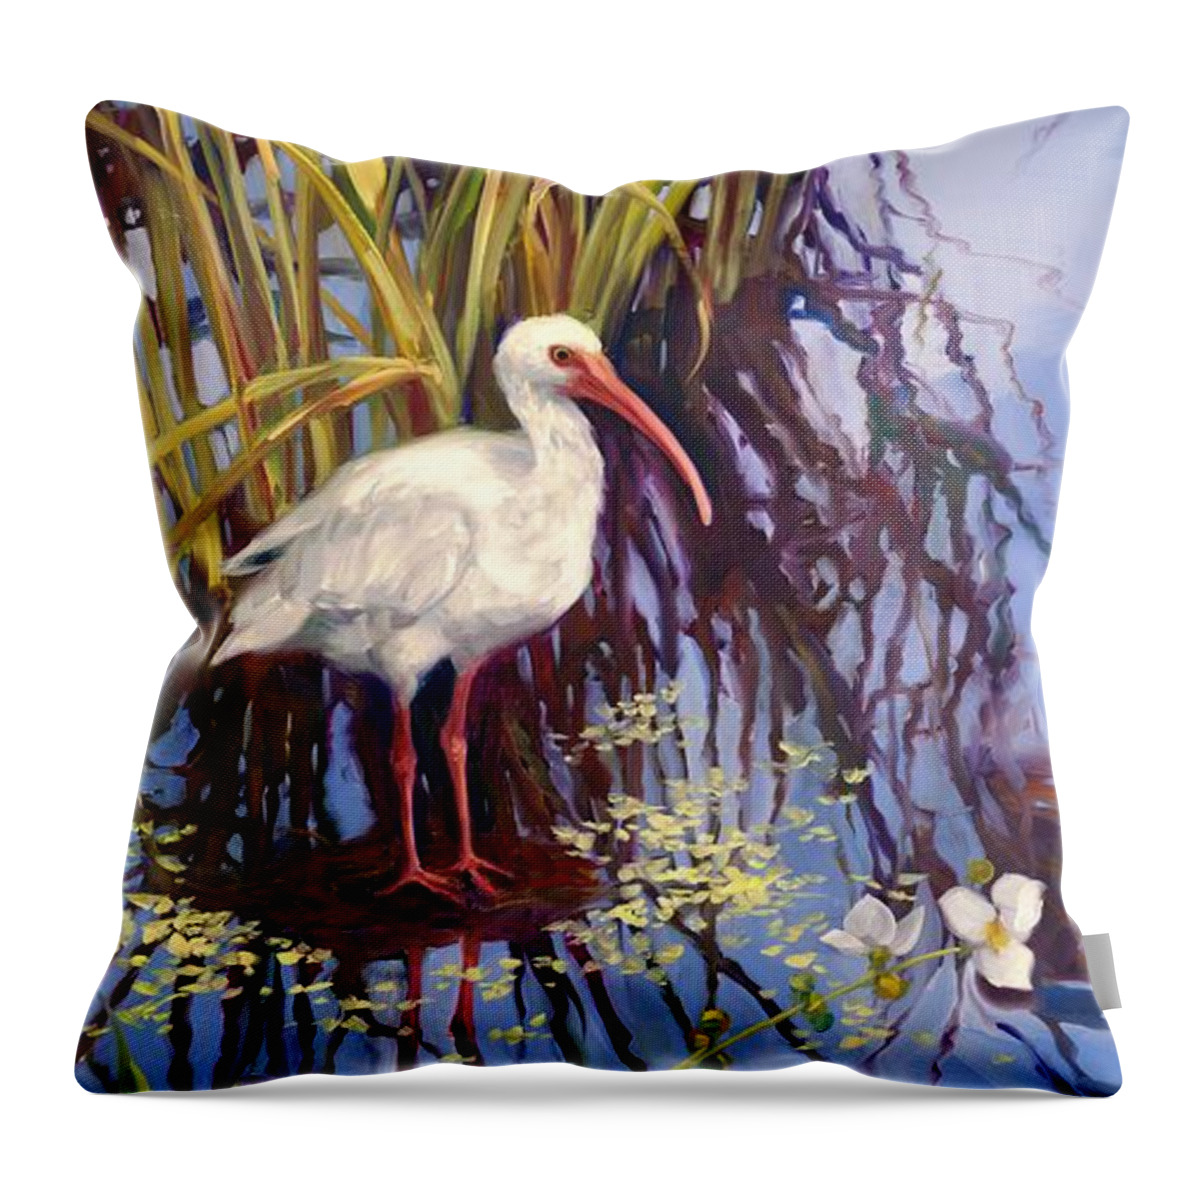 Spoon Bill Throw Pillow featuring the painting White Ibis left by Laurie Snow Hein